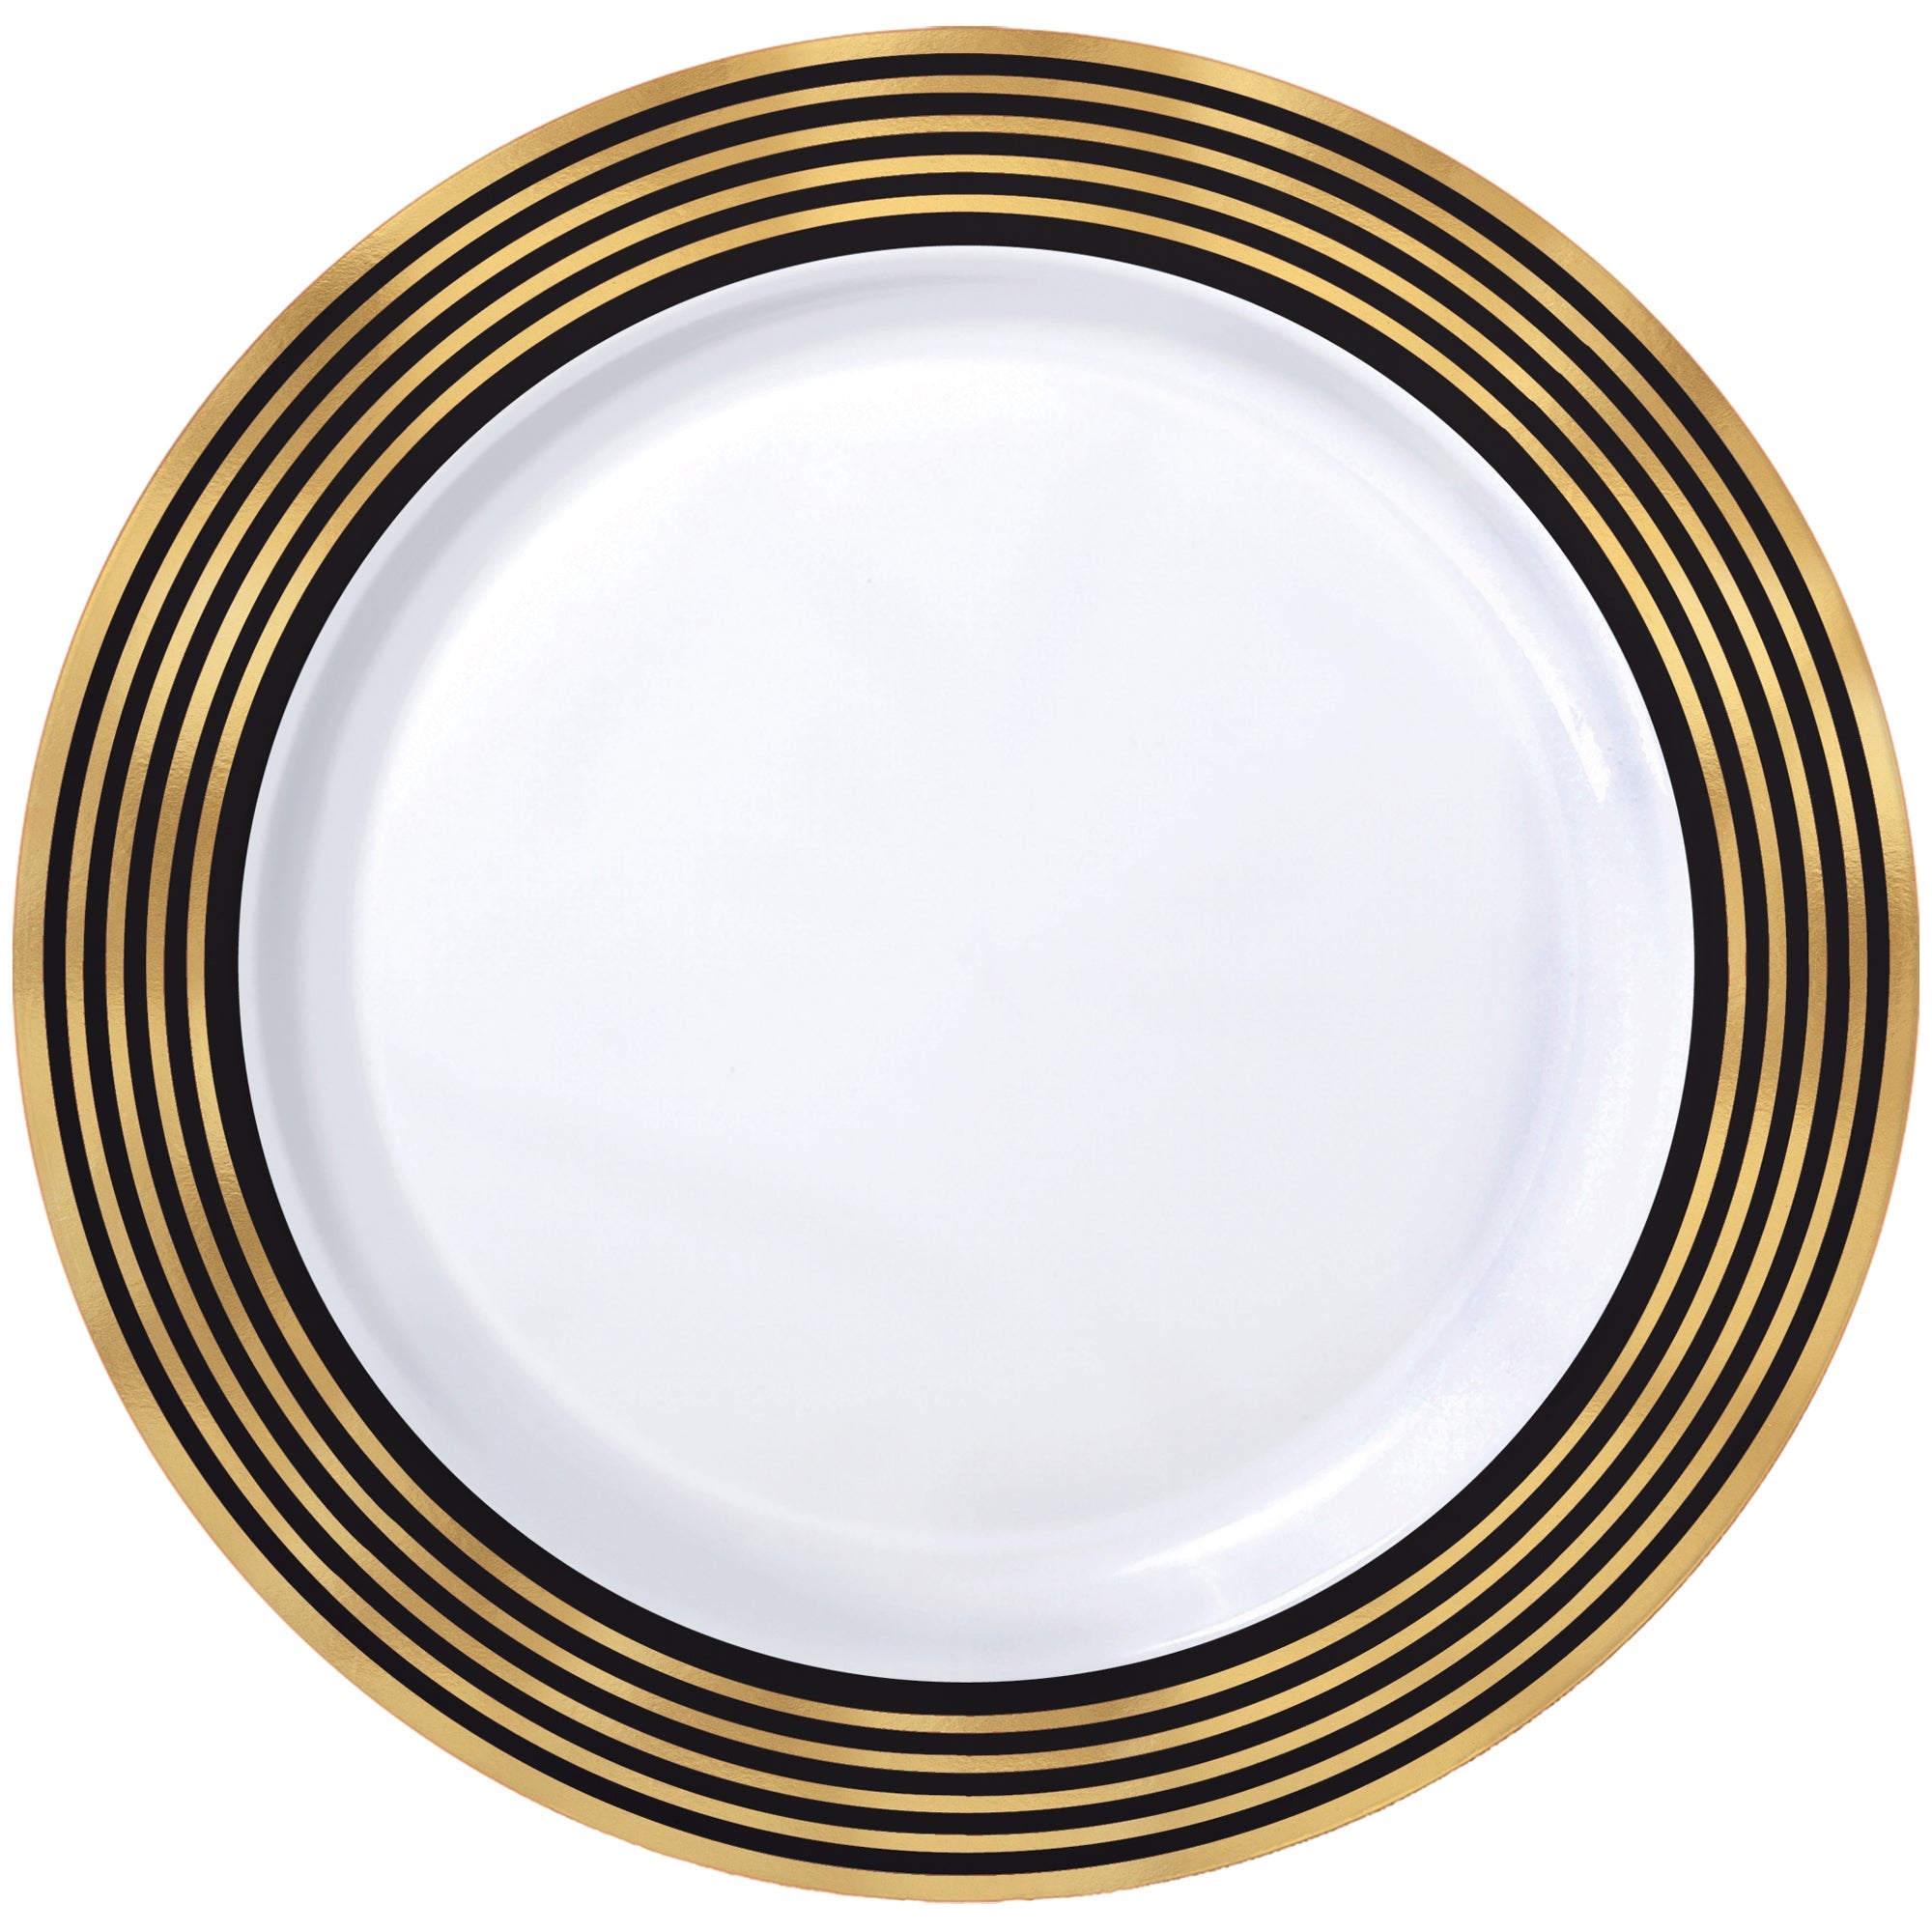 Premium 10 1/4" Gold and Black Ringed Plastic Plates Package of 20